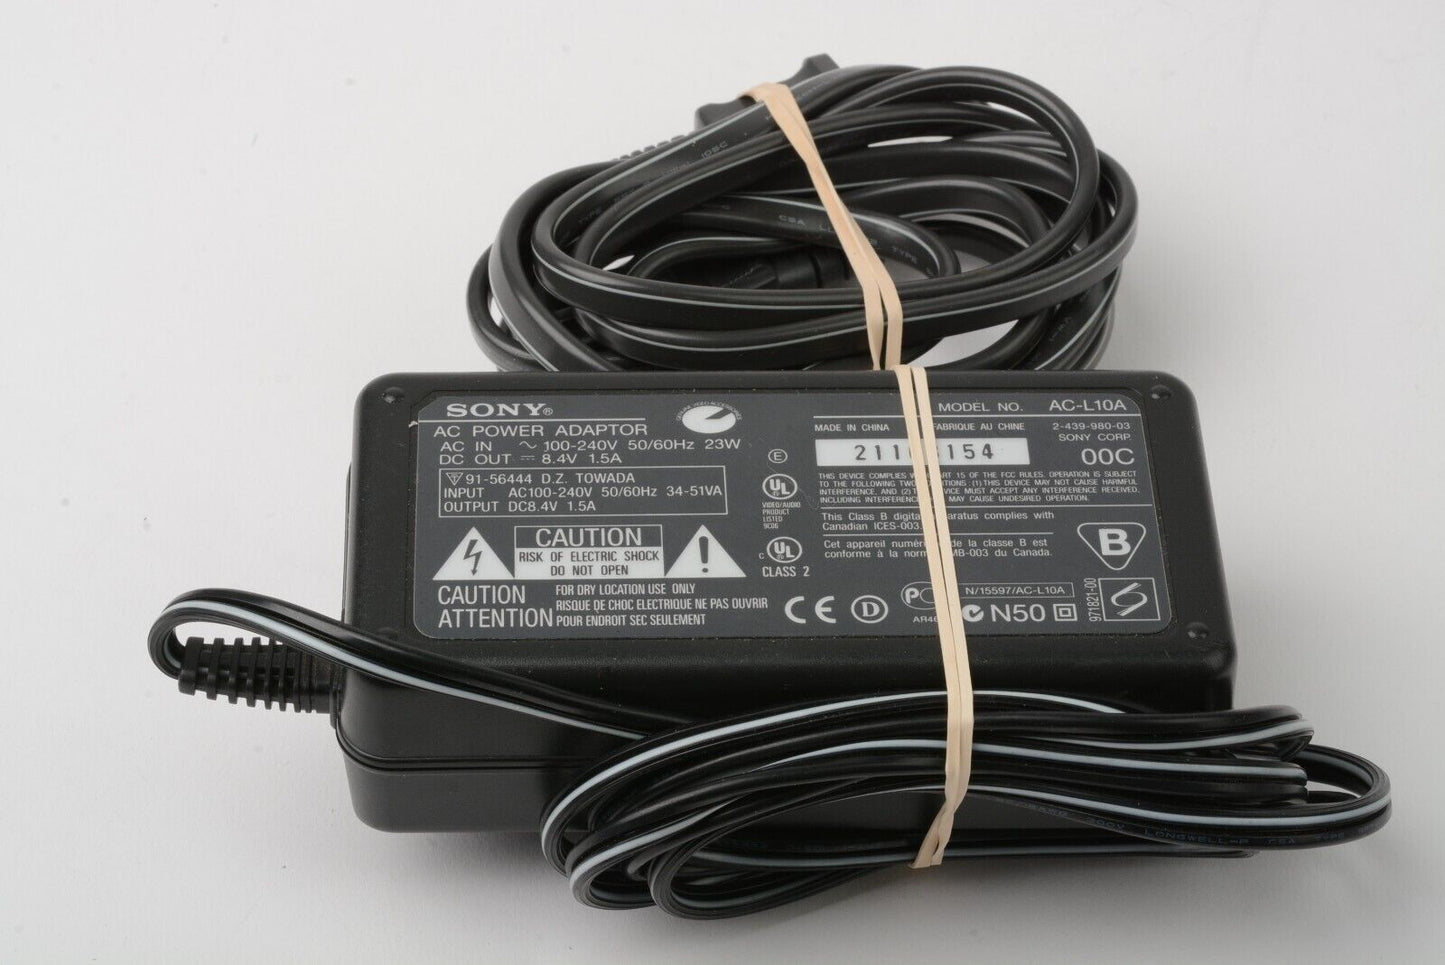 EXC++ GENUINE SONY AC-L10A AC POWER SUPPLY FOR SELECT HANDYCAM CAMCORDERS w/CORD